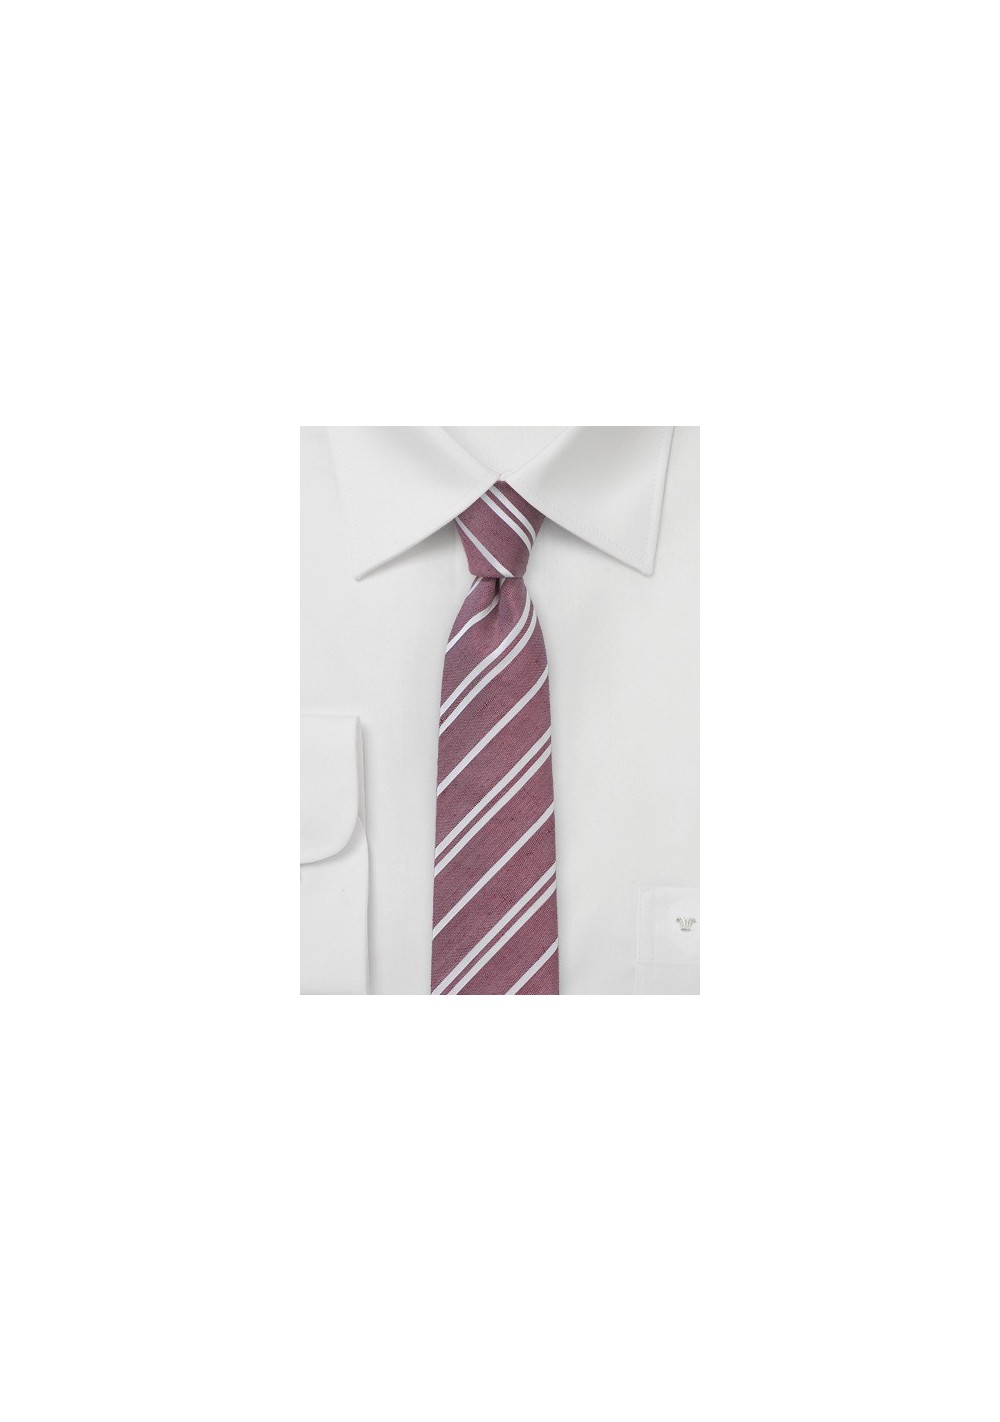 Skinny Striped Tie in Washed Red